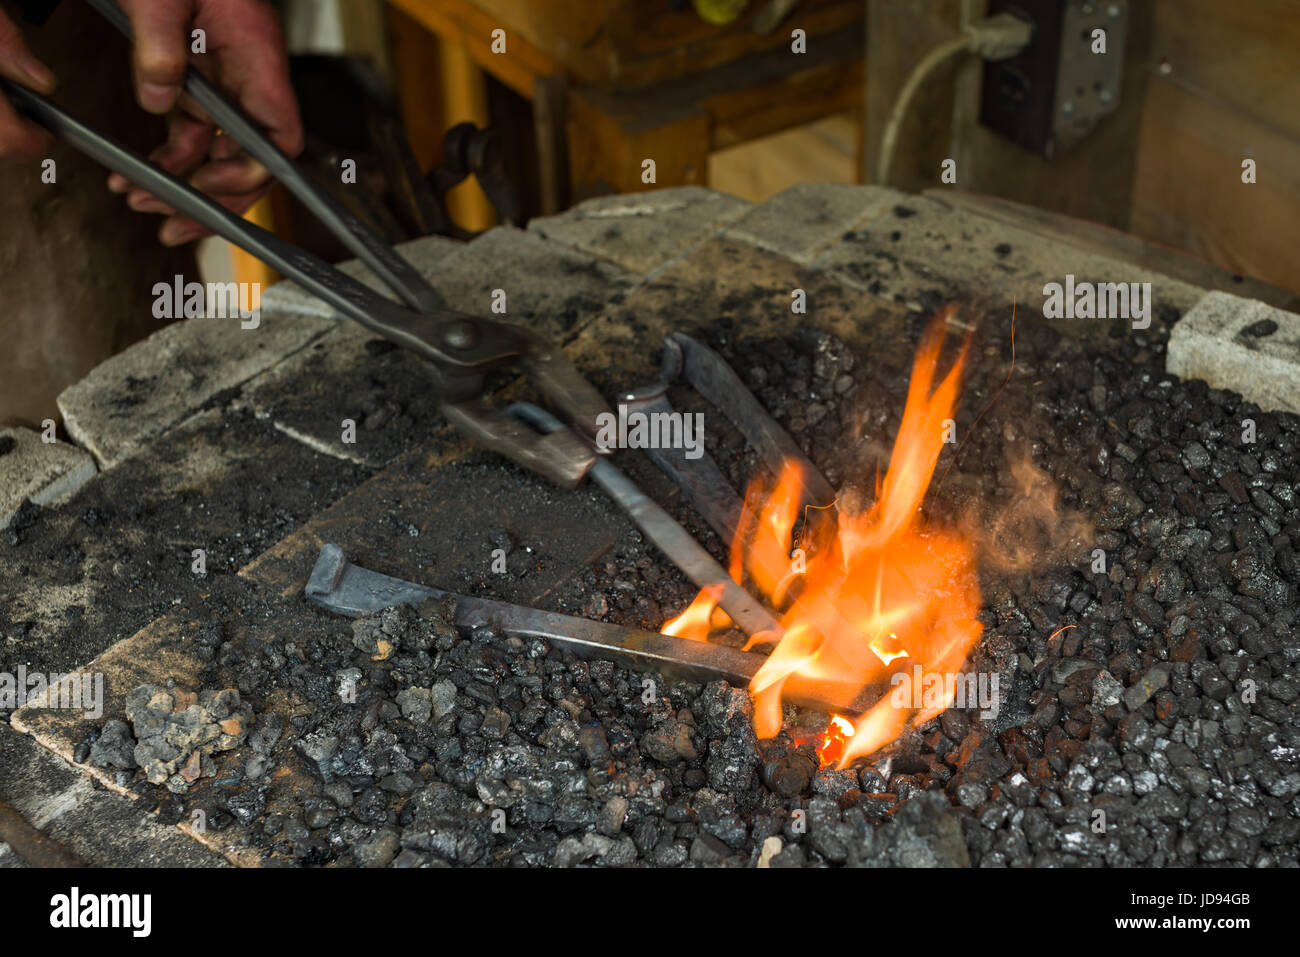 Blacksmith Heating And Turning Steel With Tongs Steel In Charcoal Forge In Workshop Stock Photo